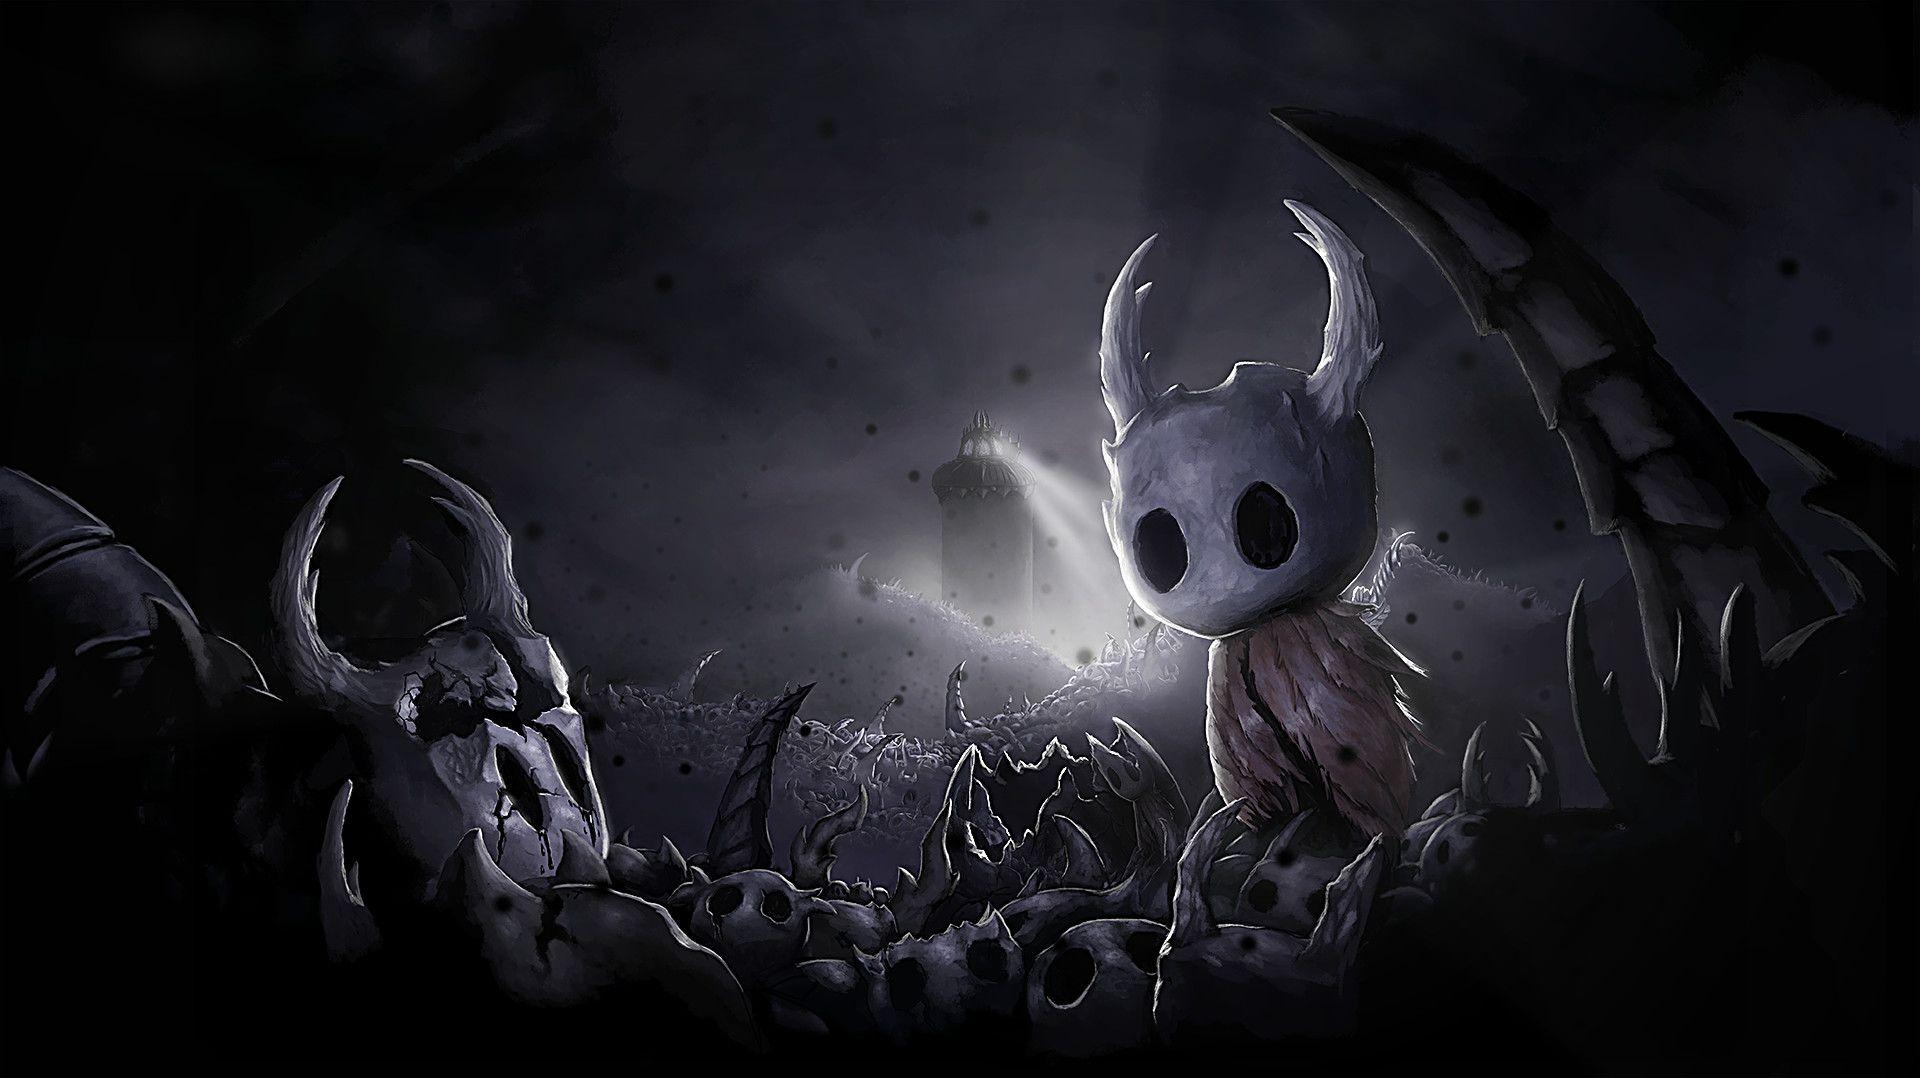 Hollow Knight Desktop Wallpaper Discover more Action Adventure Developed  Game Hollow Knight wallpaper httpswwwenwallpapercomh  Knight  Wallpaper Anime